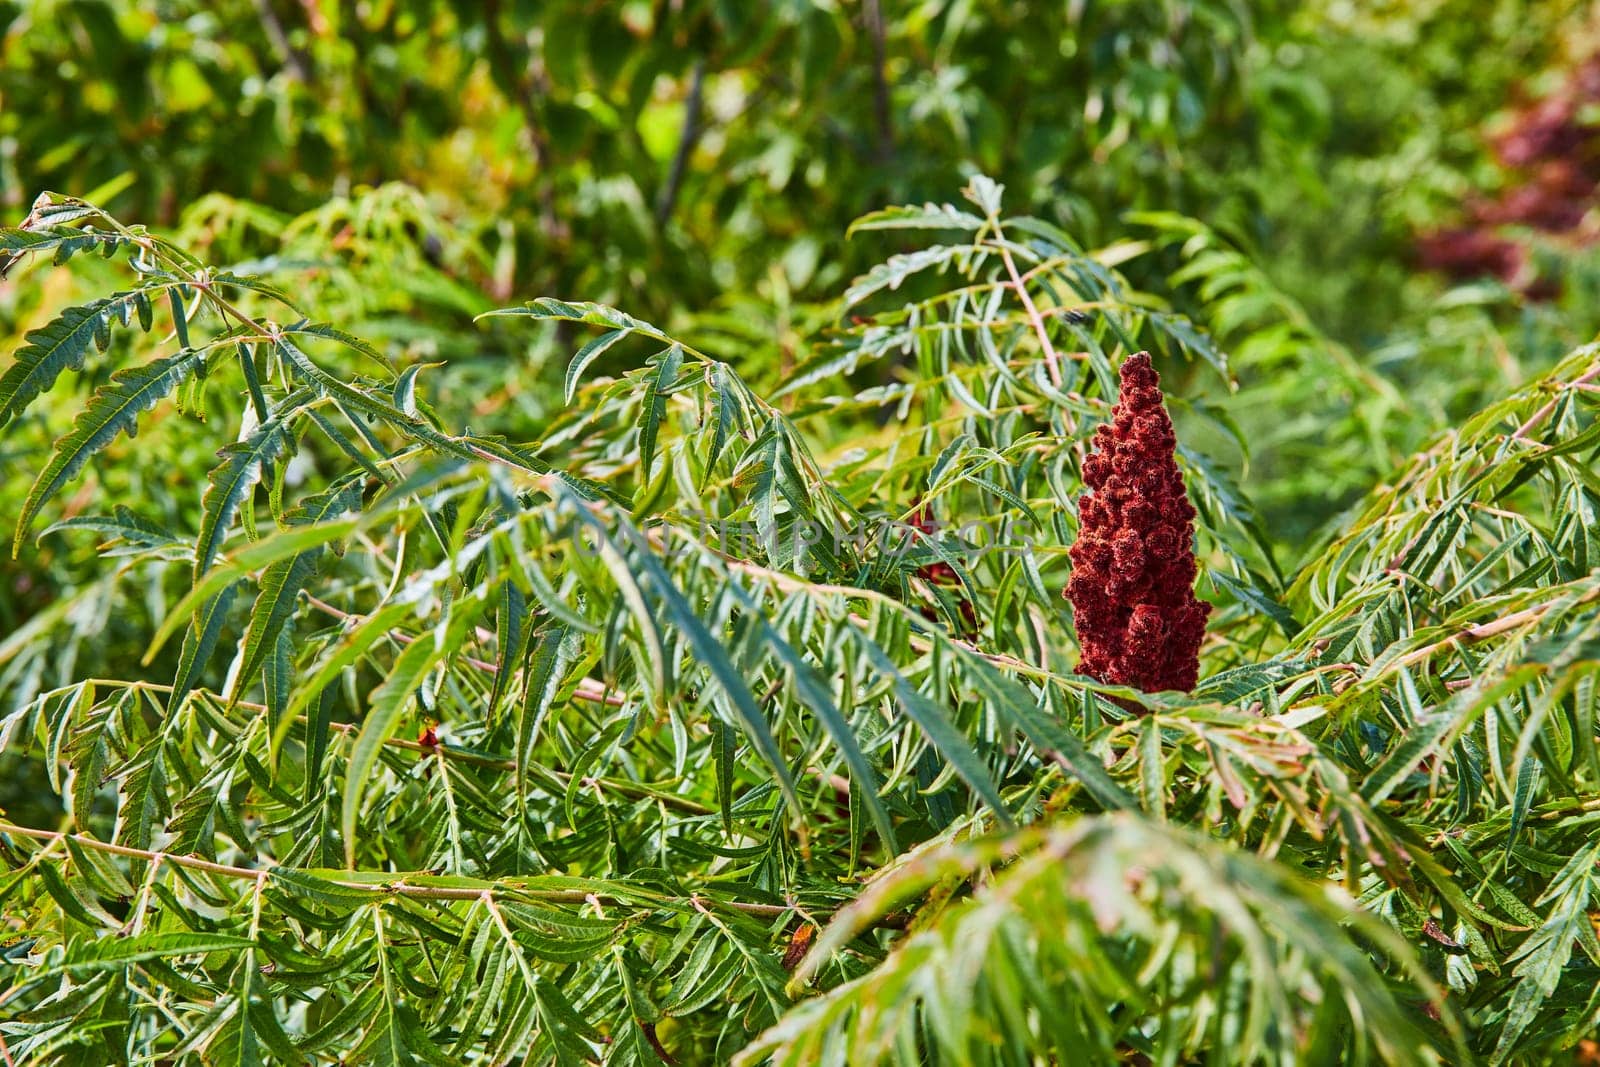 Vibrant Sumac Foliage and Flower Spike Close-Up by njproductions